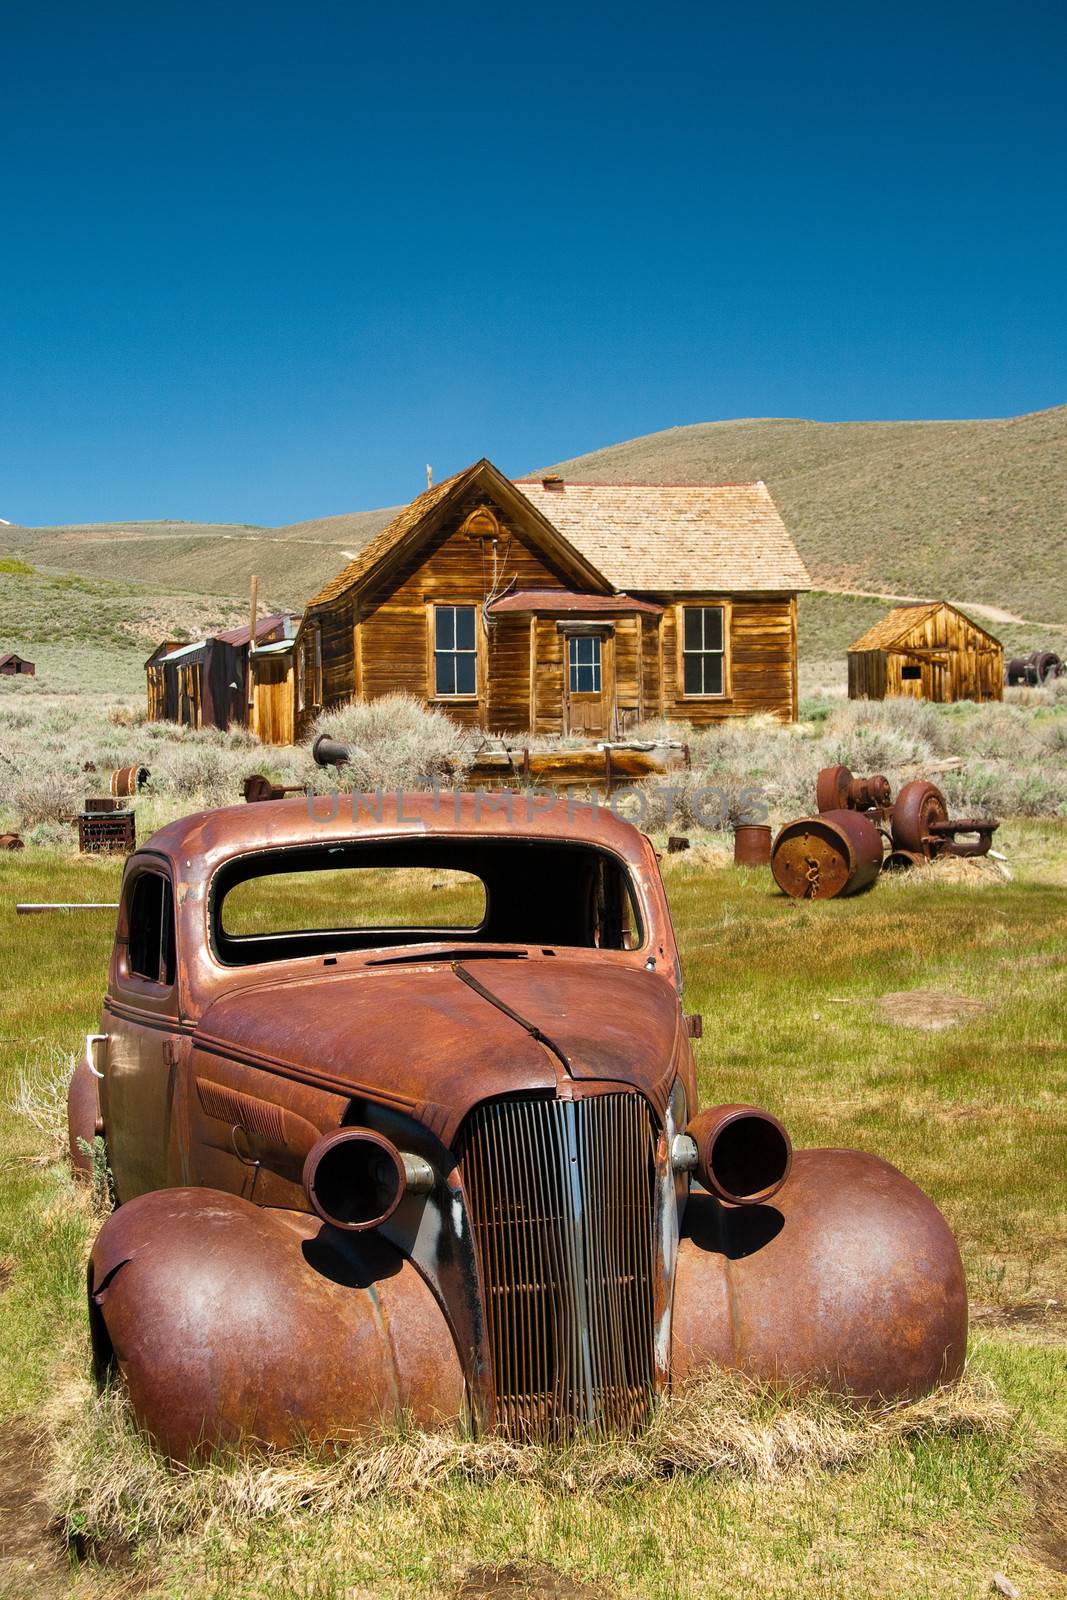 Log cabins and an abandoned decaying car  at Bodie State Historic Park  a Californian gold-mining ghost town.